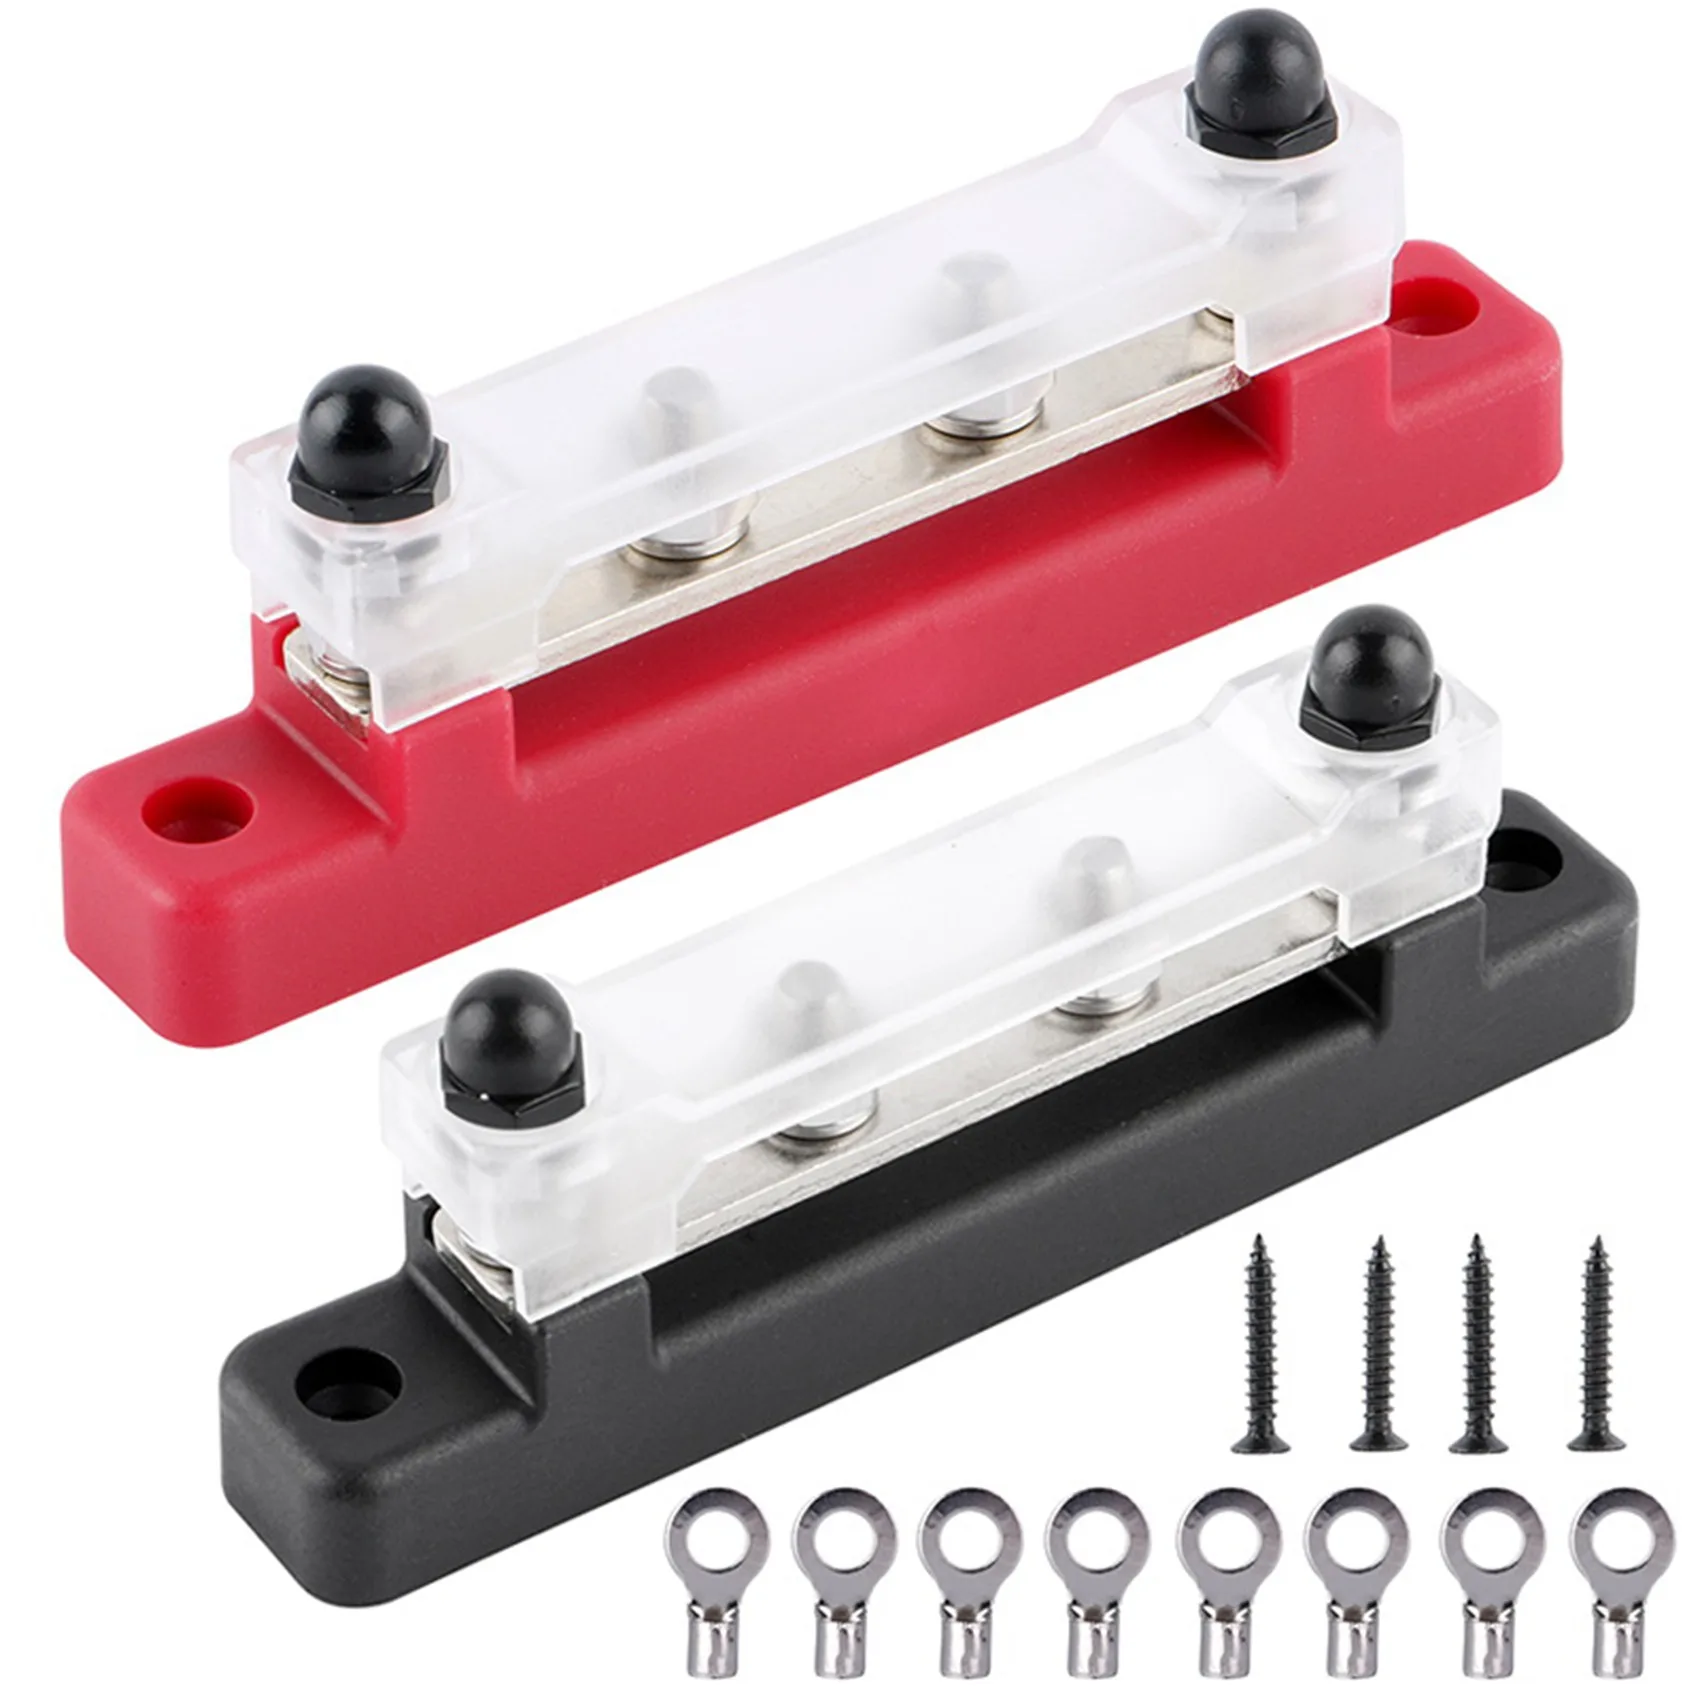 

2-Piece Set/4-Way Straight Busbar AC and DC High Current with Transparent Top Cover for Car, Marine, Caravan, RV